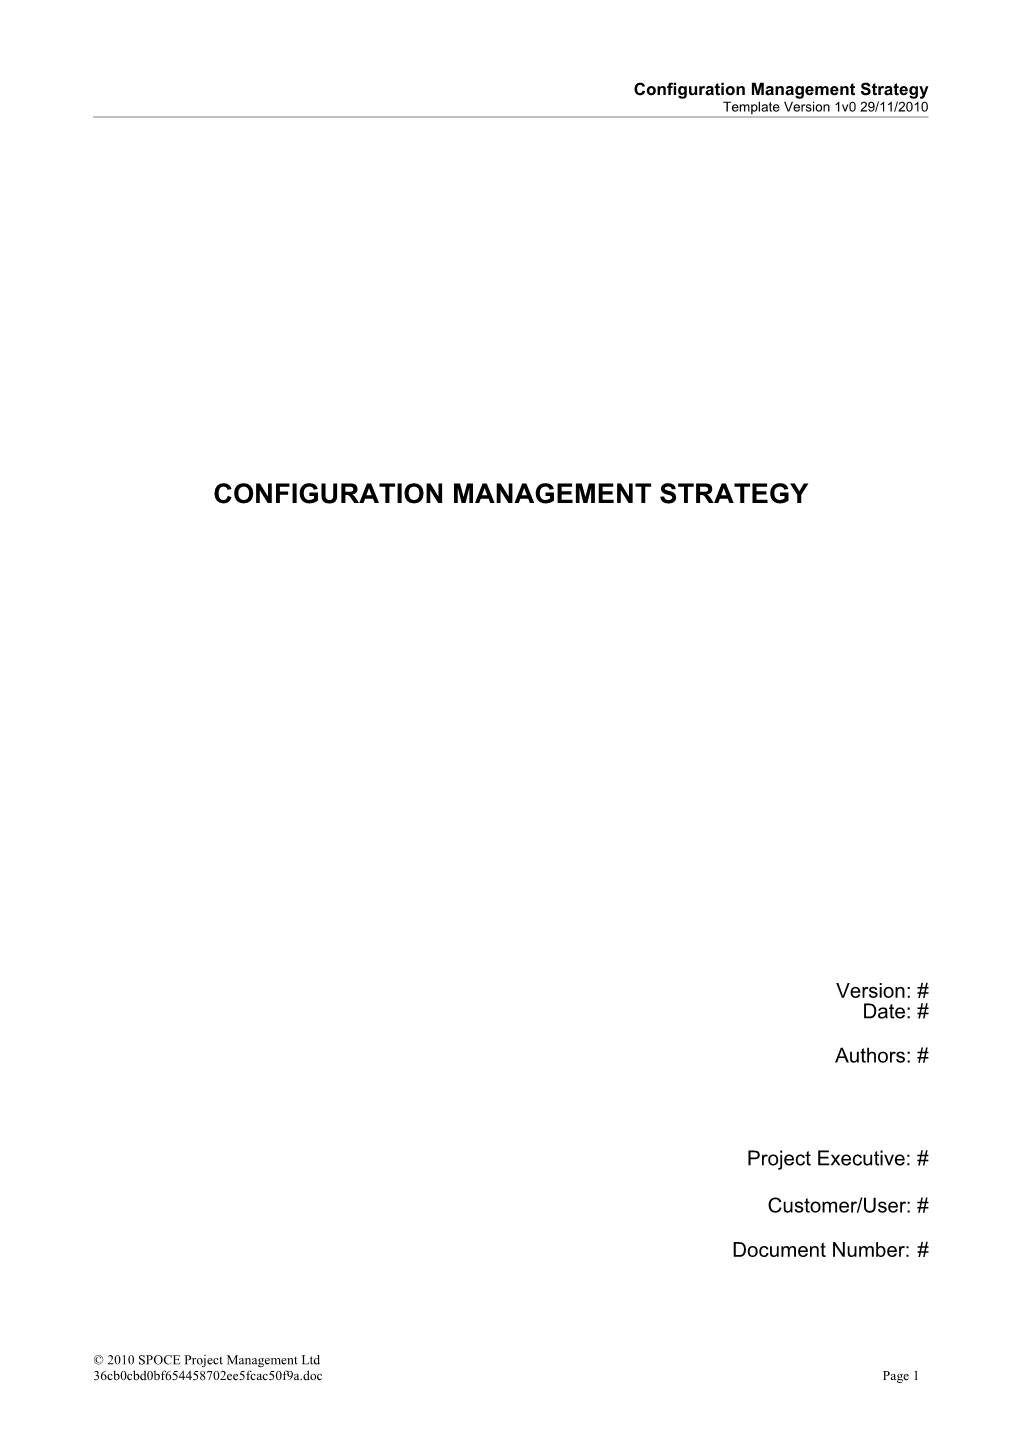 Configuration Mgt Strategy